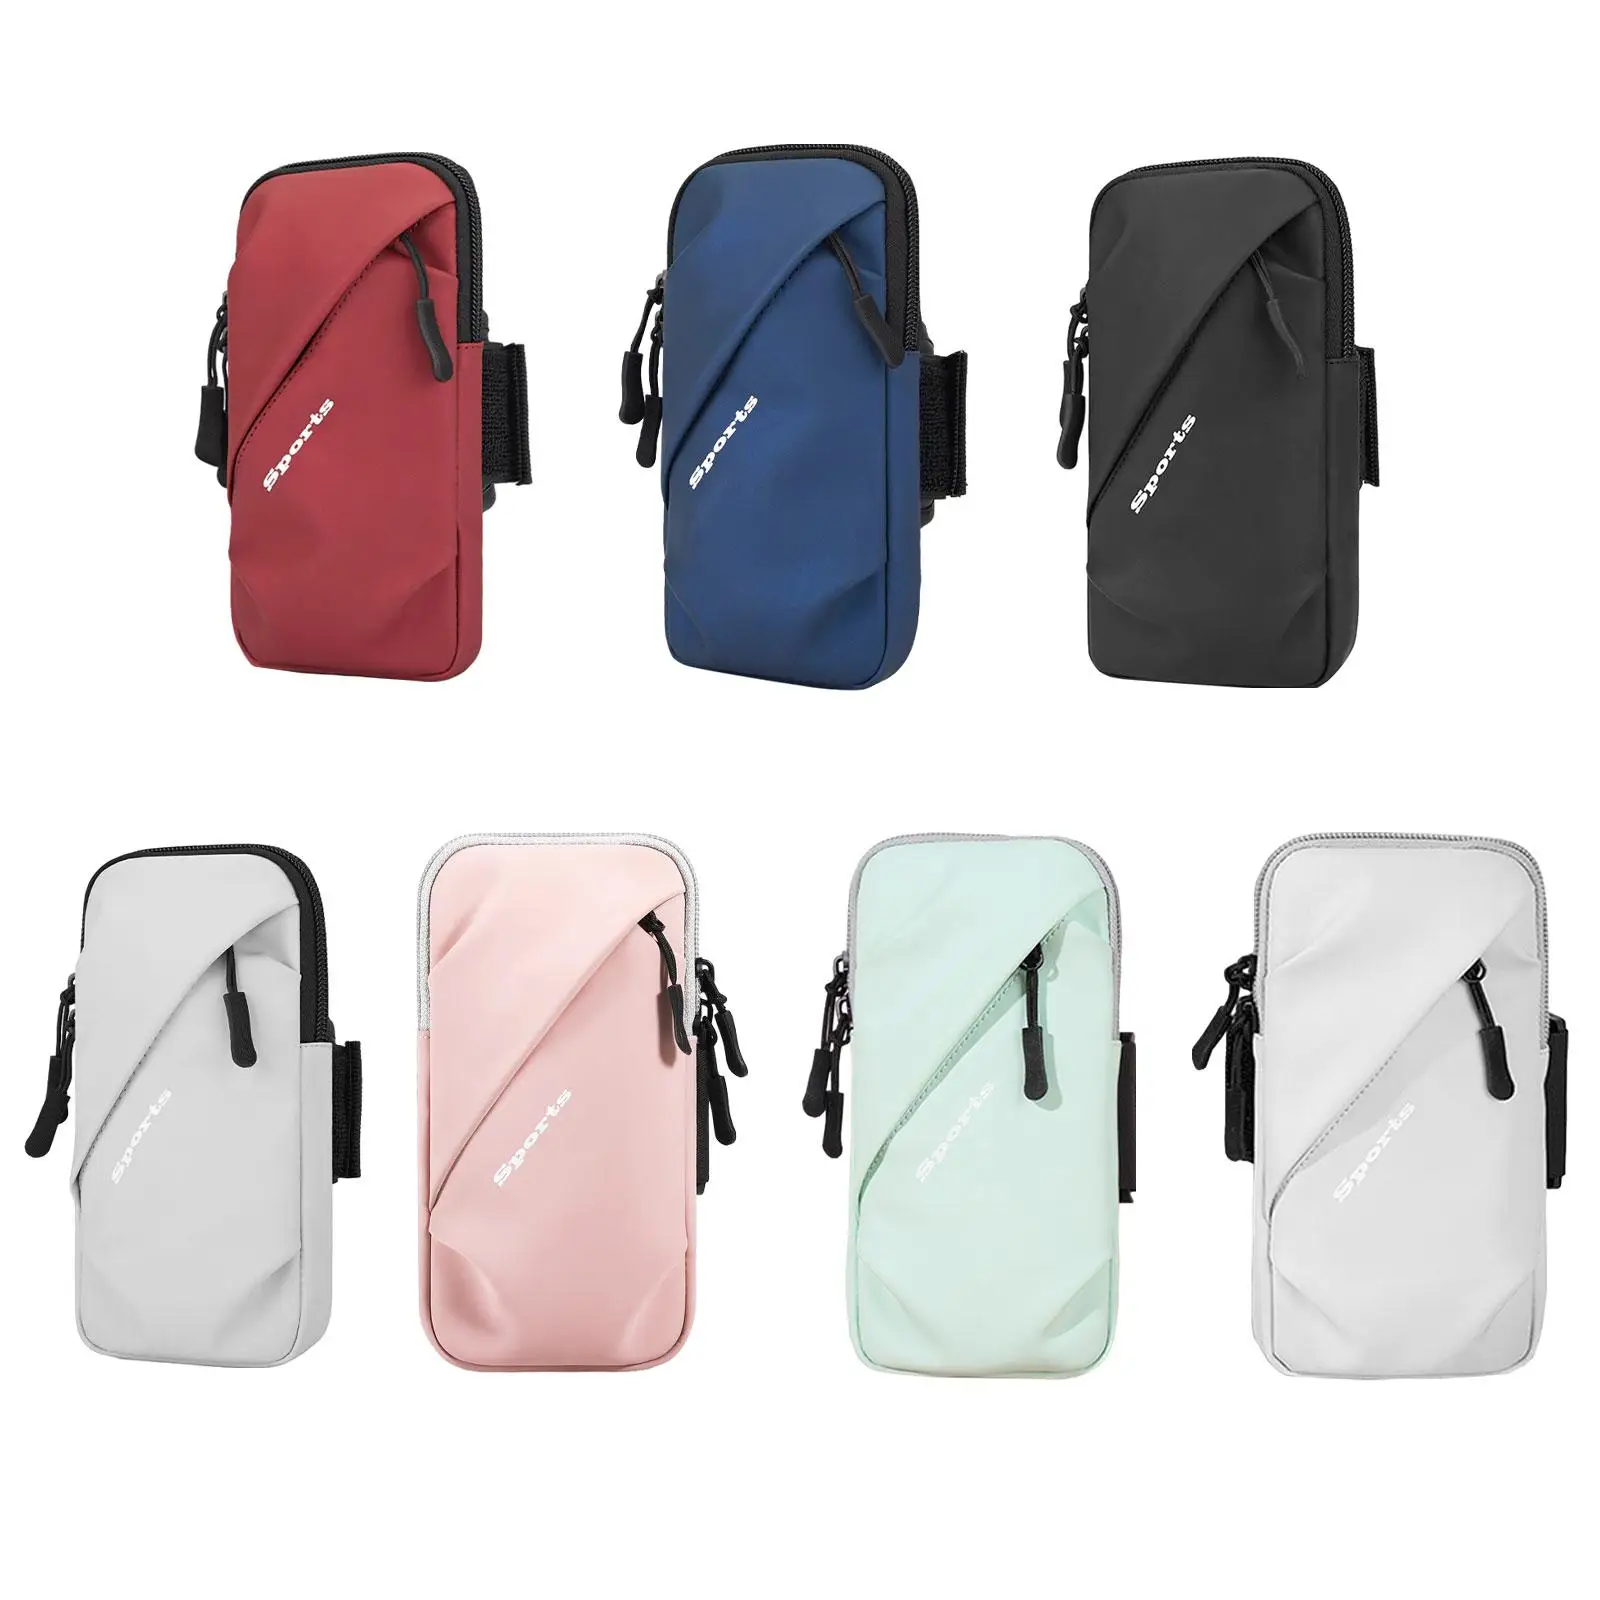 

Phone Arm Band Bag Women Men Phone Holder Pouch Cellphone Holder Phone Wristband for Hiking Workout Sport Jogging Walking